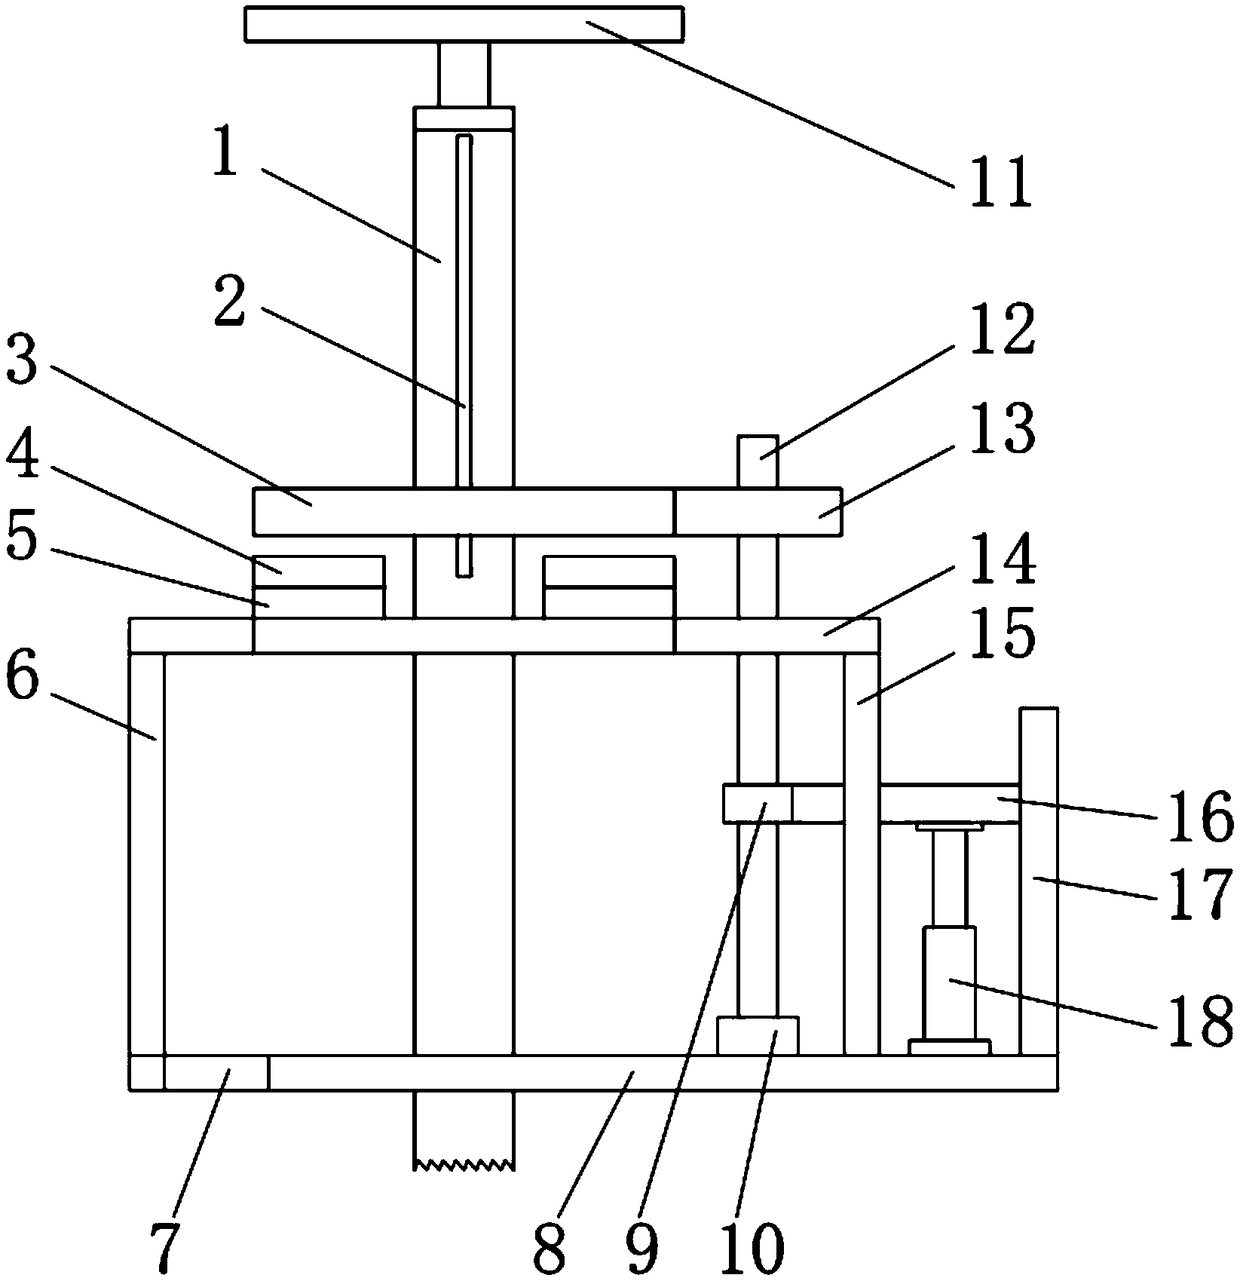 Heavy metal soil sampling device and using method thereof